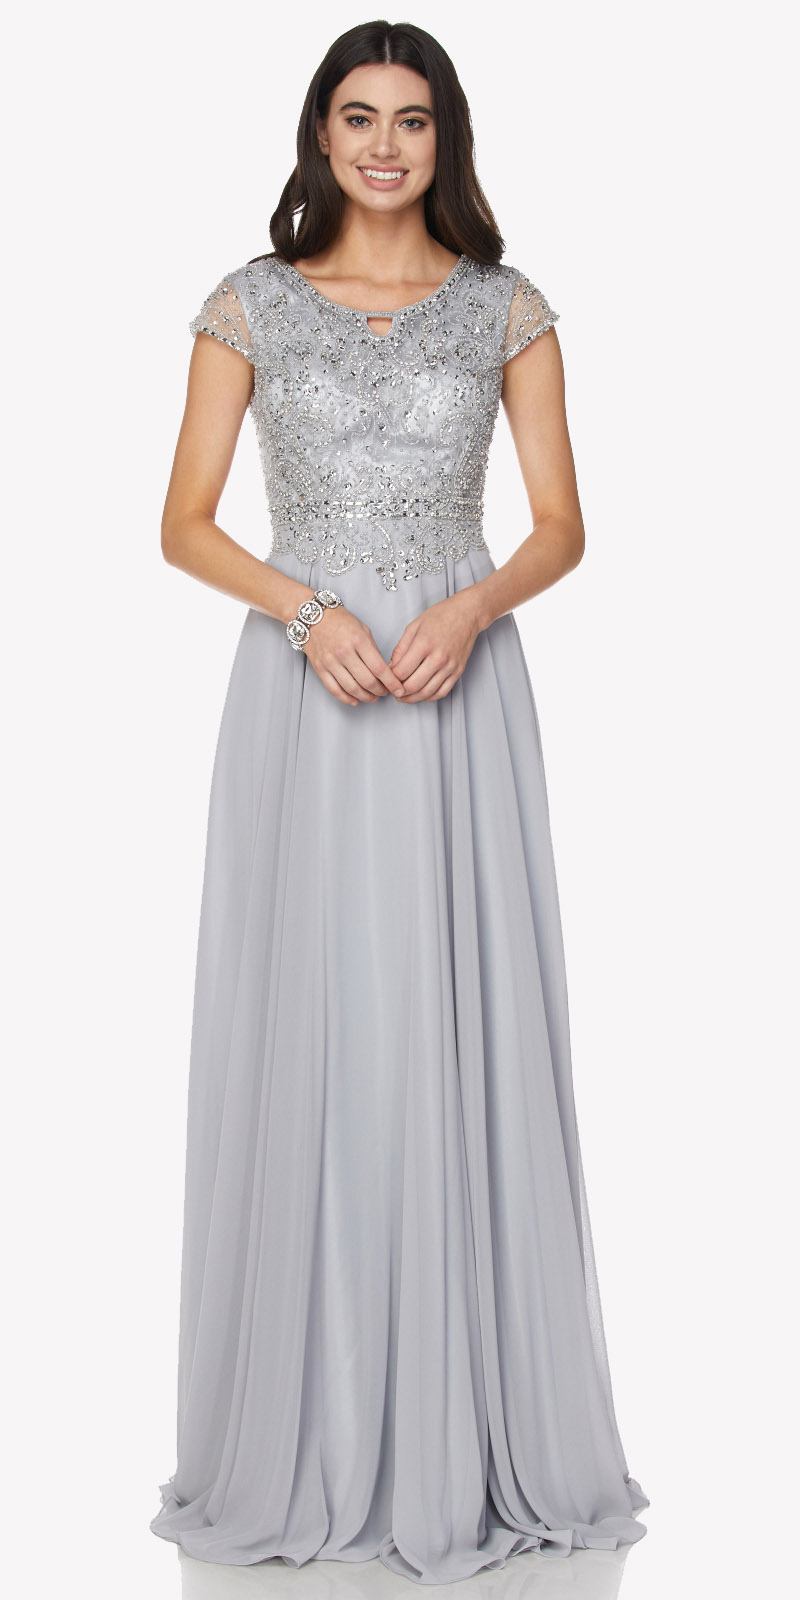 Cap Sleeves Beaded Bodice A-line Long Formal Dress Silver